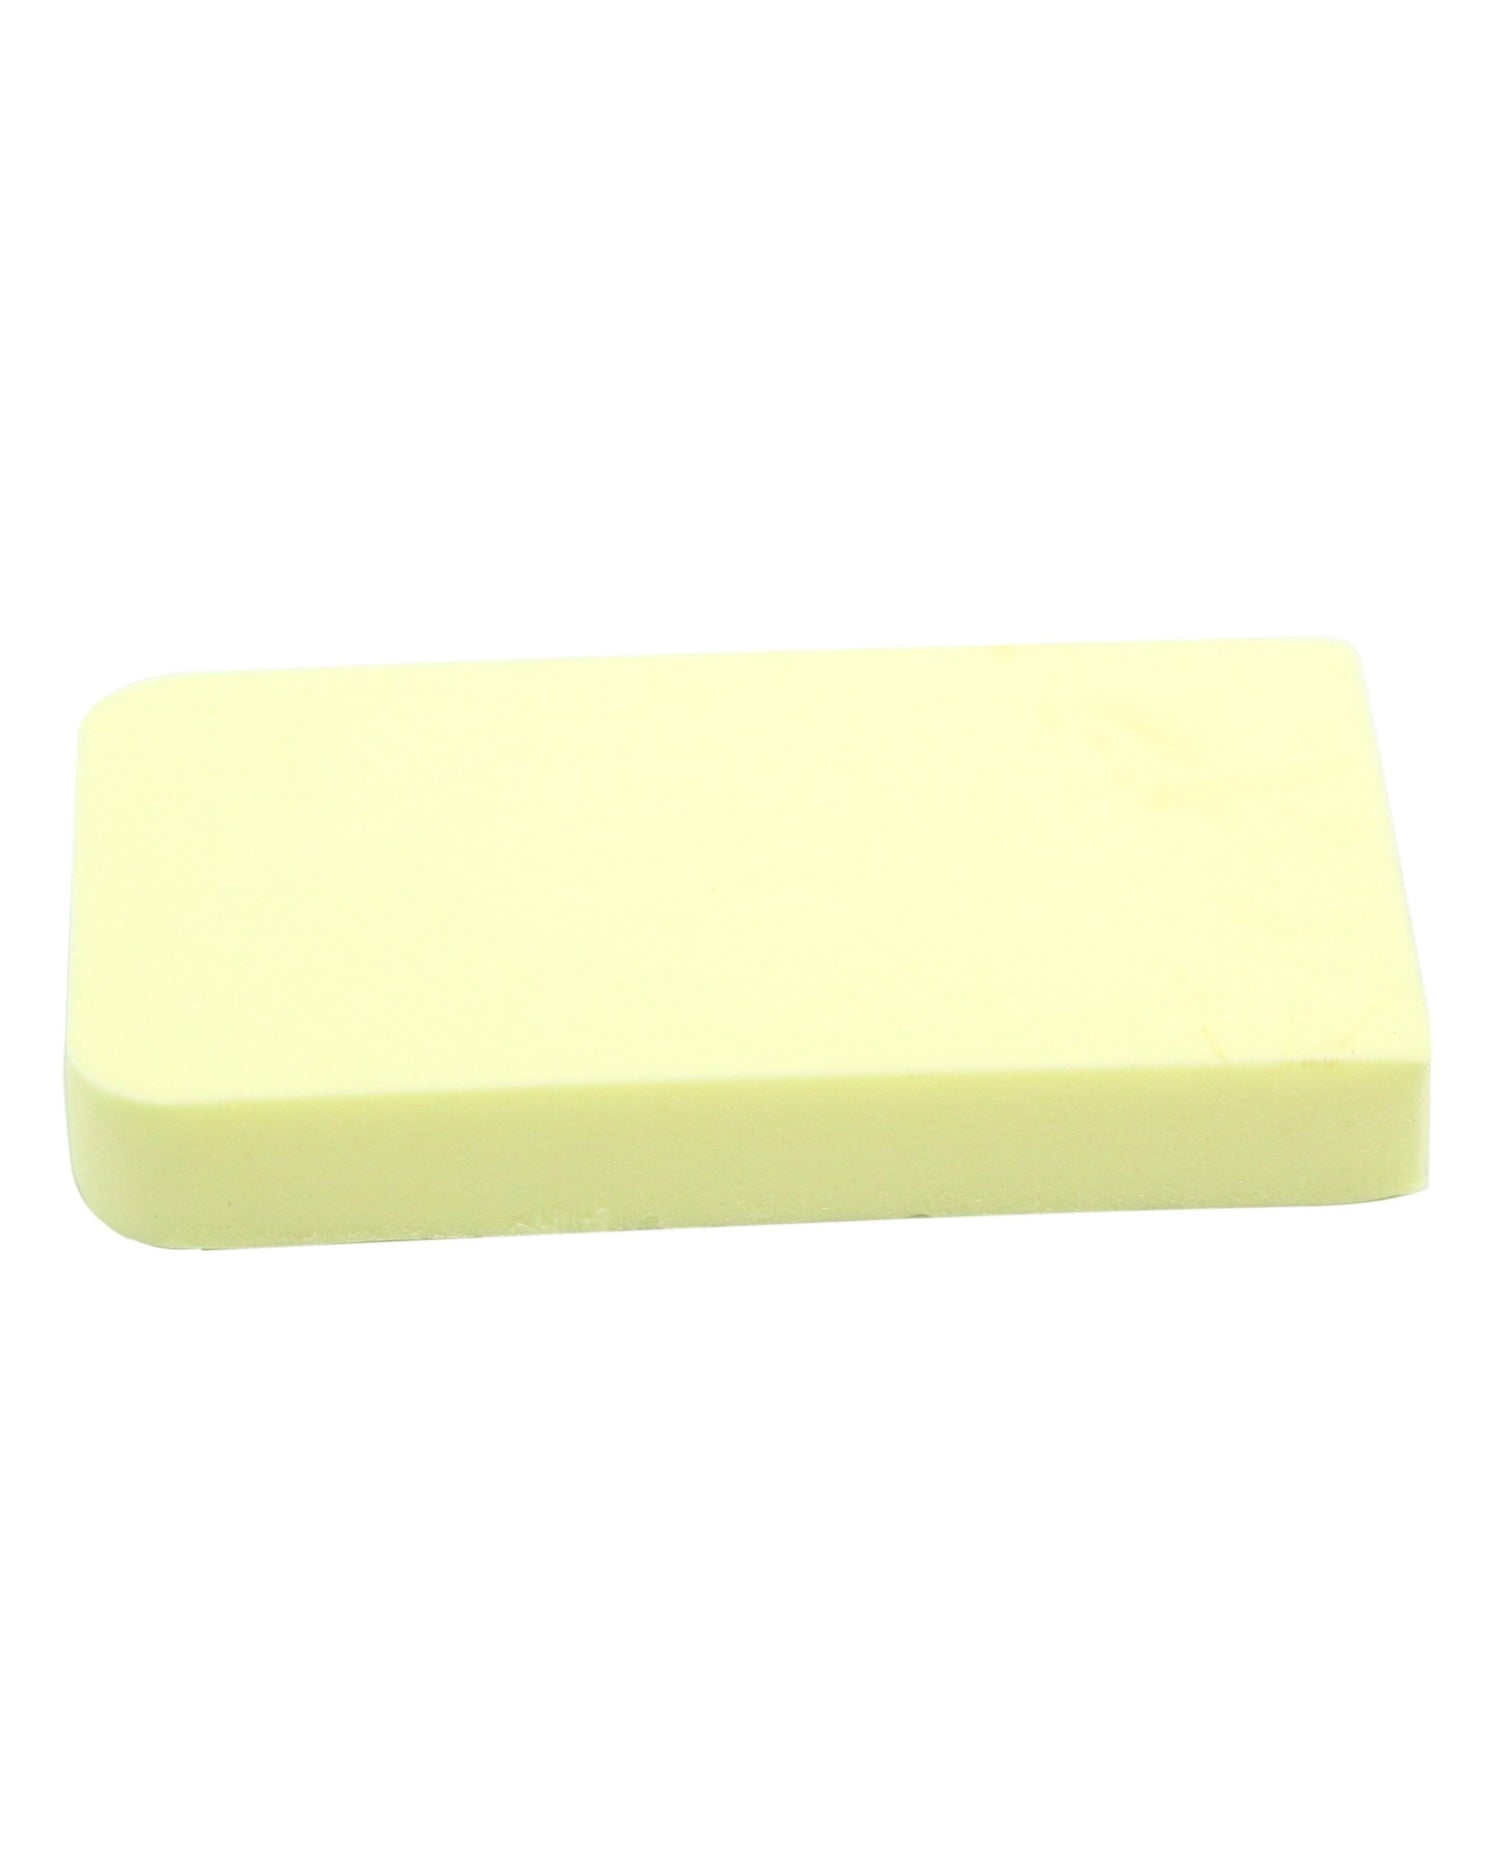 Image 1 of Musicnomad Humitar Replacement Sponge - SKU# MN301 : Product Type Accessories & Parts : Elderly Instruments